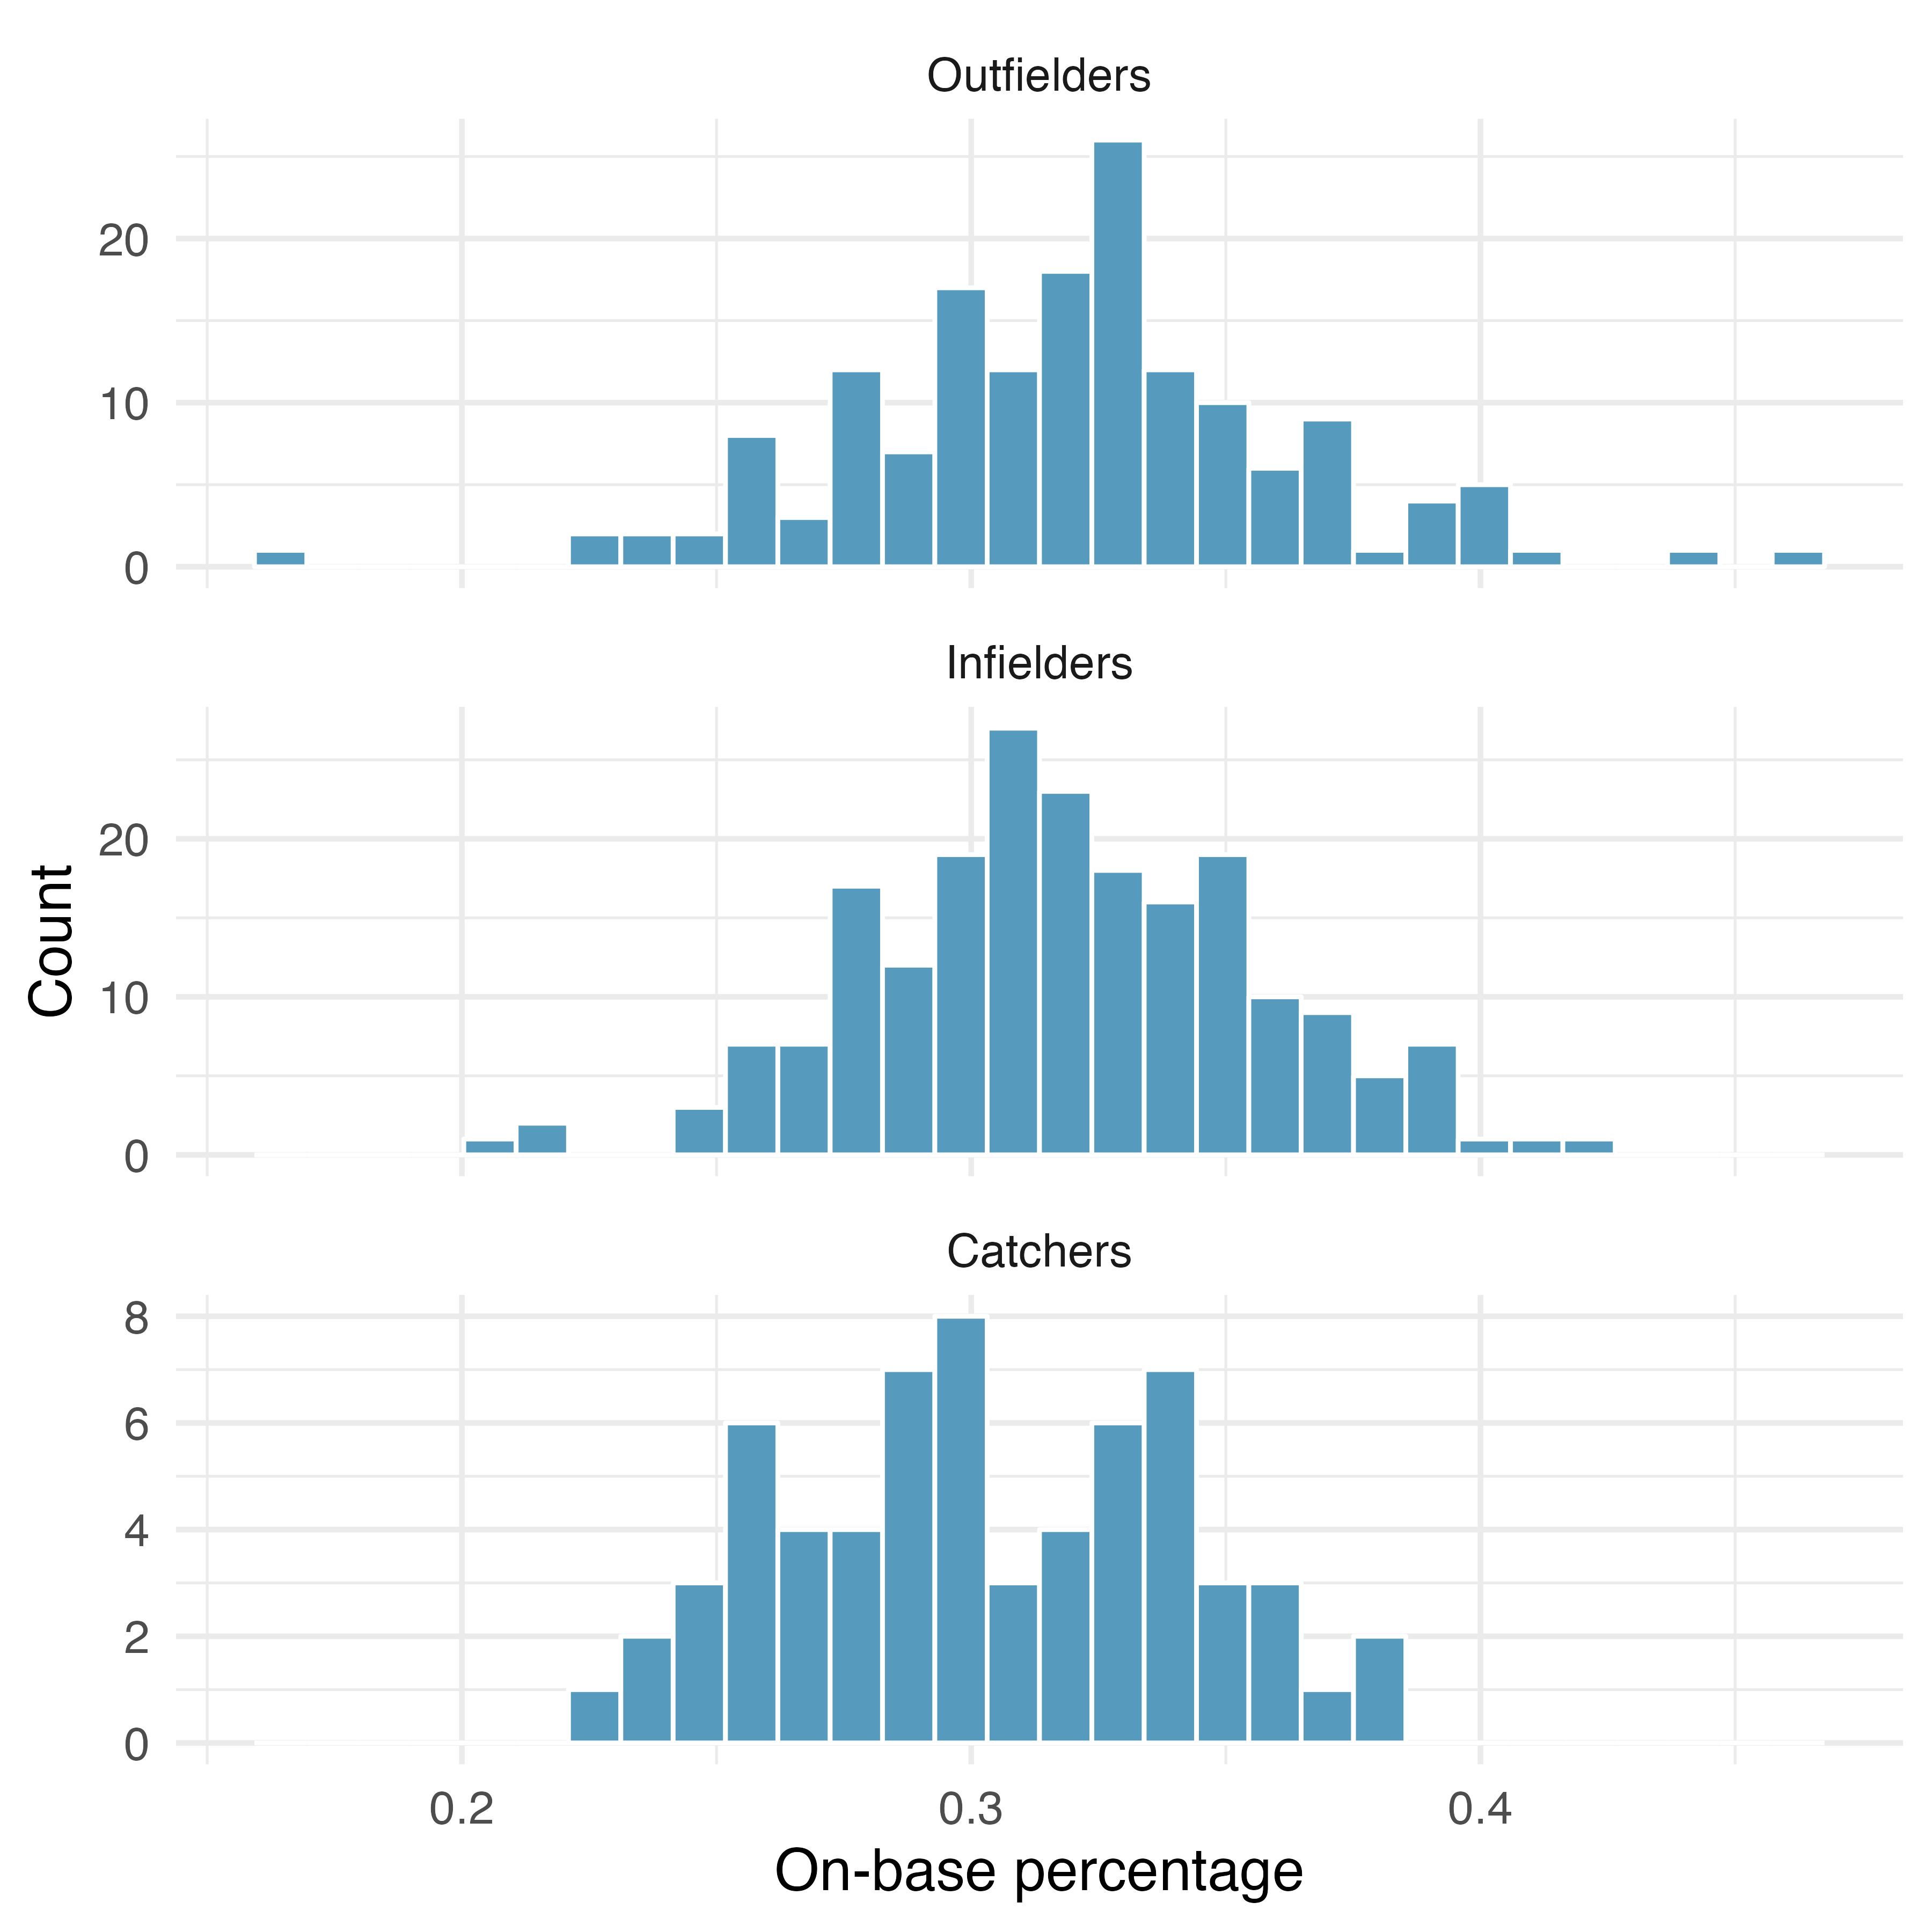 Three separate histograms of on-base percentage, one for each field position of outfielder, infielder, and catcher.  All three histograms are reasonably bell-shaped and symmetric.